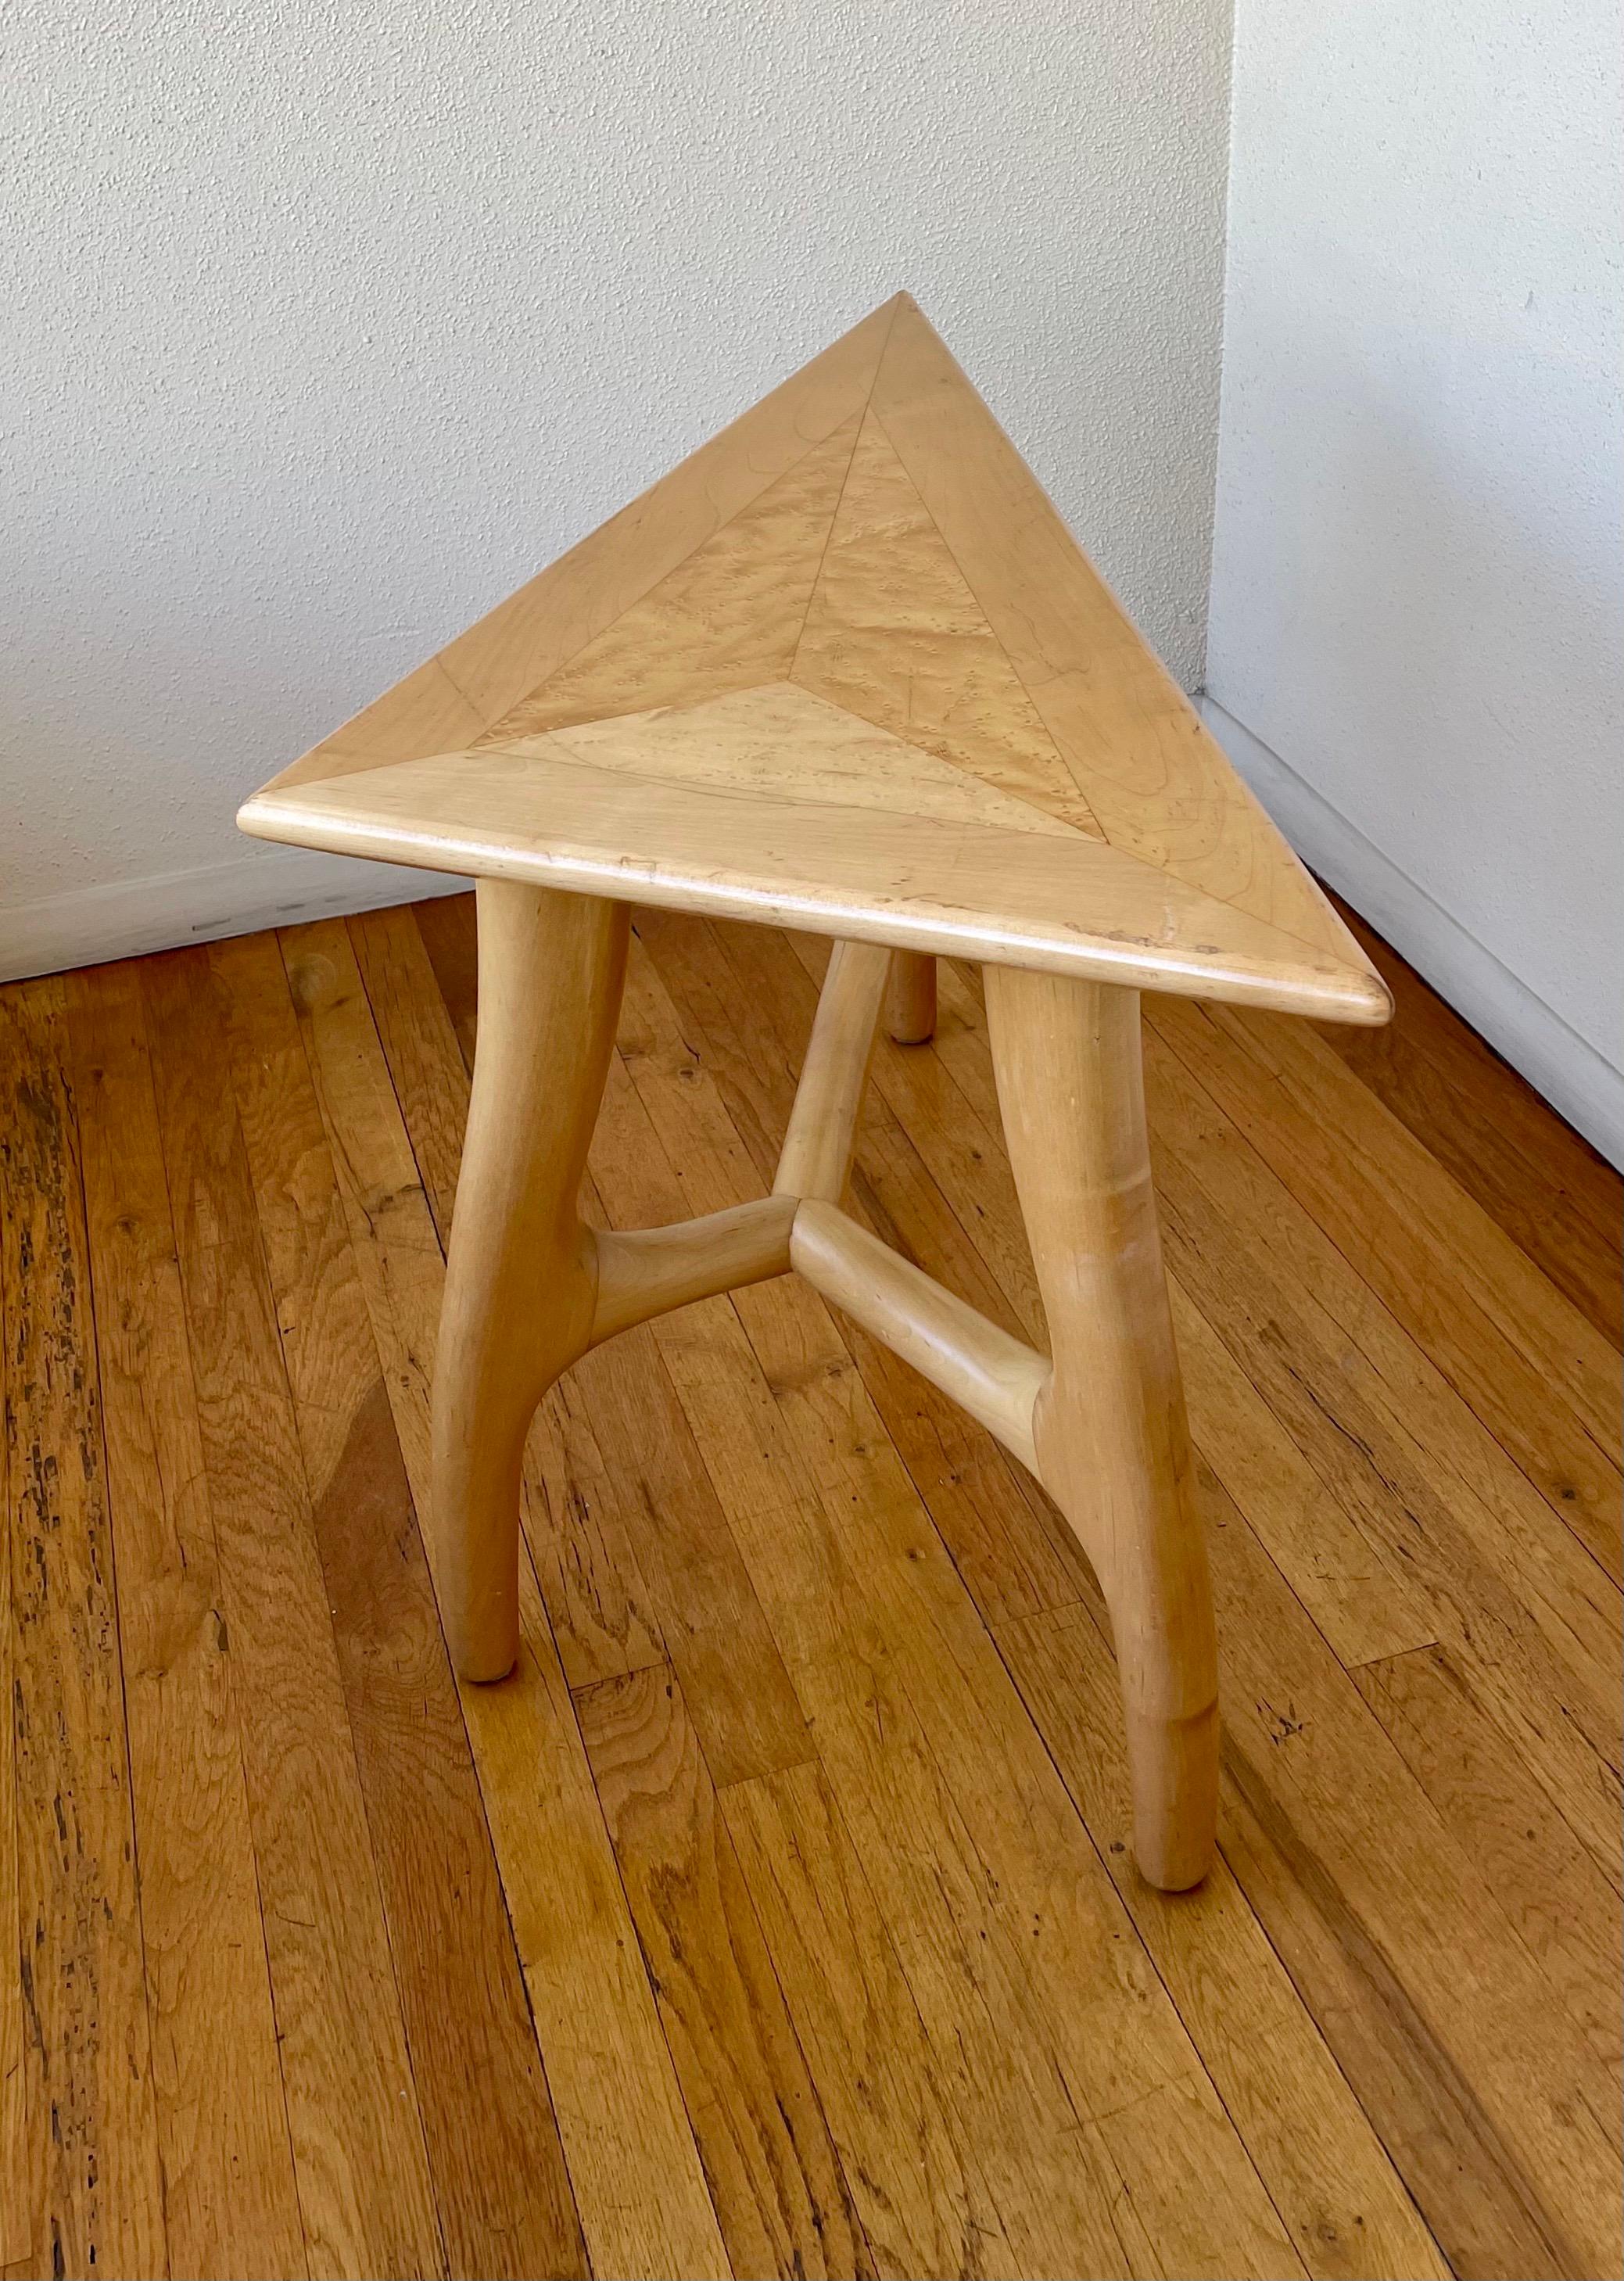 North American Post Modern Solid Maple Freeform Occasional Table Signed by David Frisk For Sale